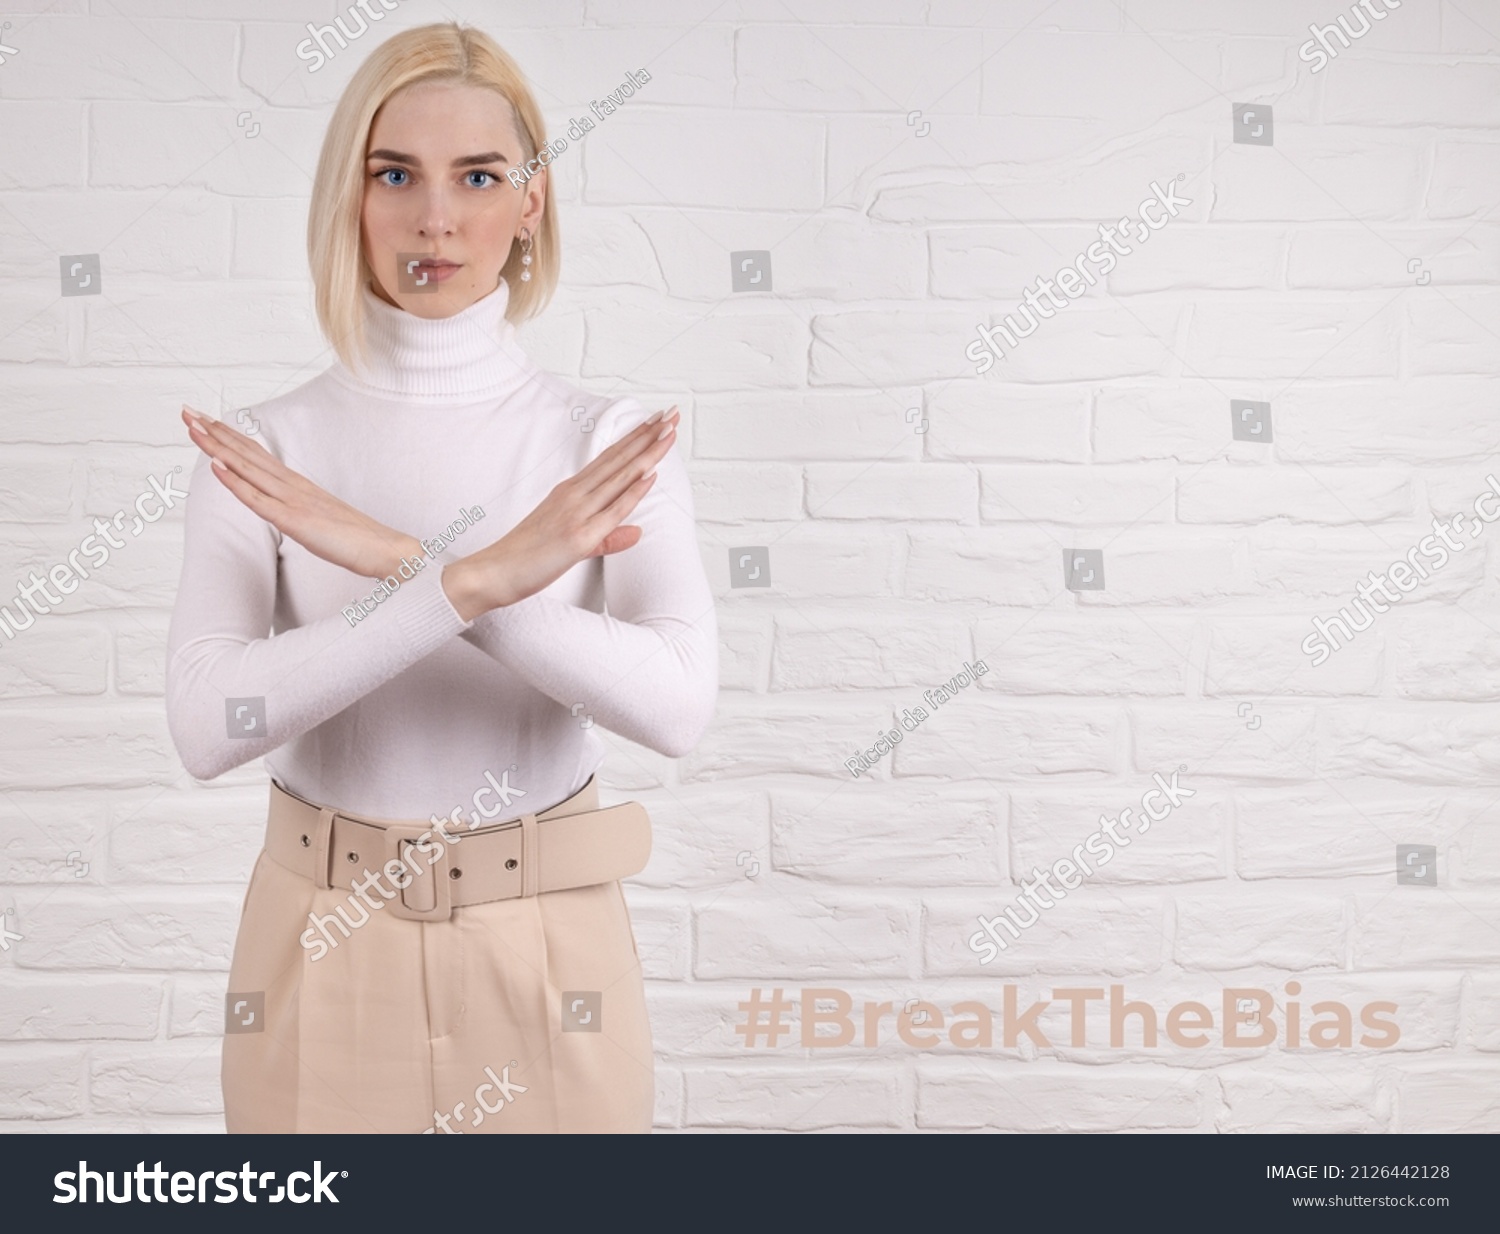 Break the bias symbol of woman's international day. The arms of a girl in white are crossed on a white brick wall. Woman arms crossed to show solidarity, breaking stereotypes, inequality
 #2126442128